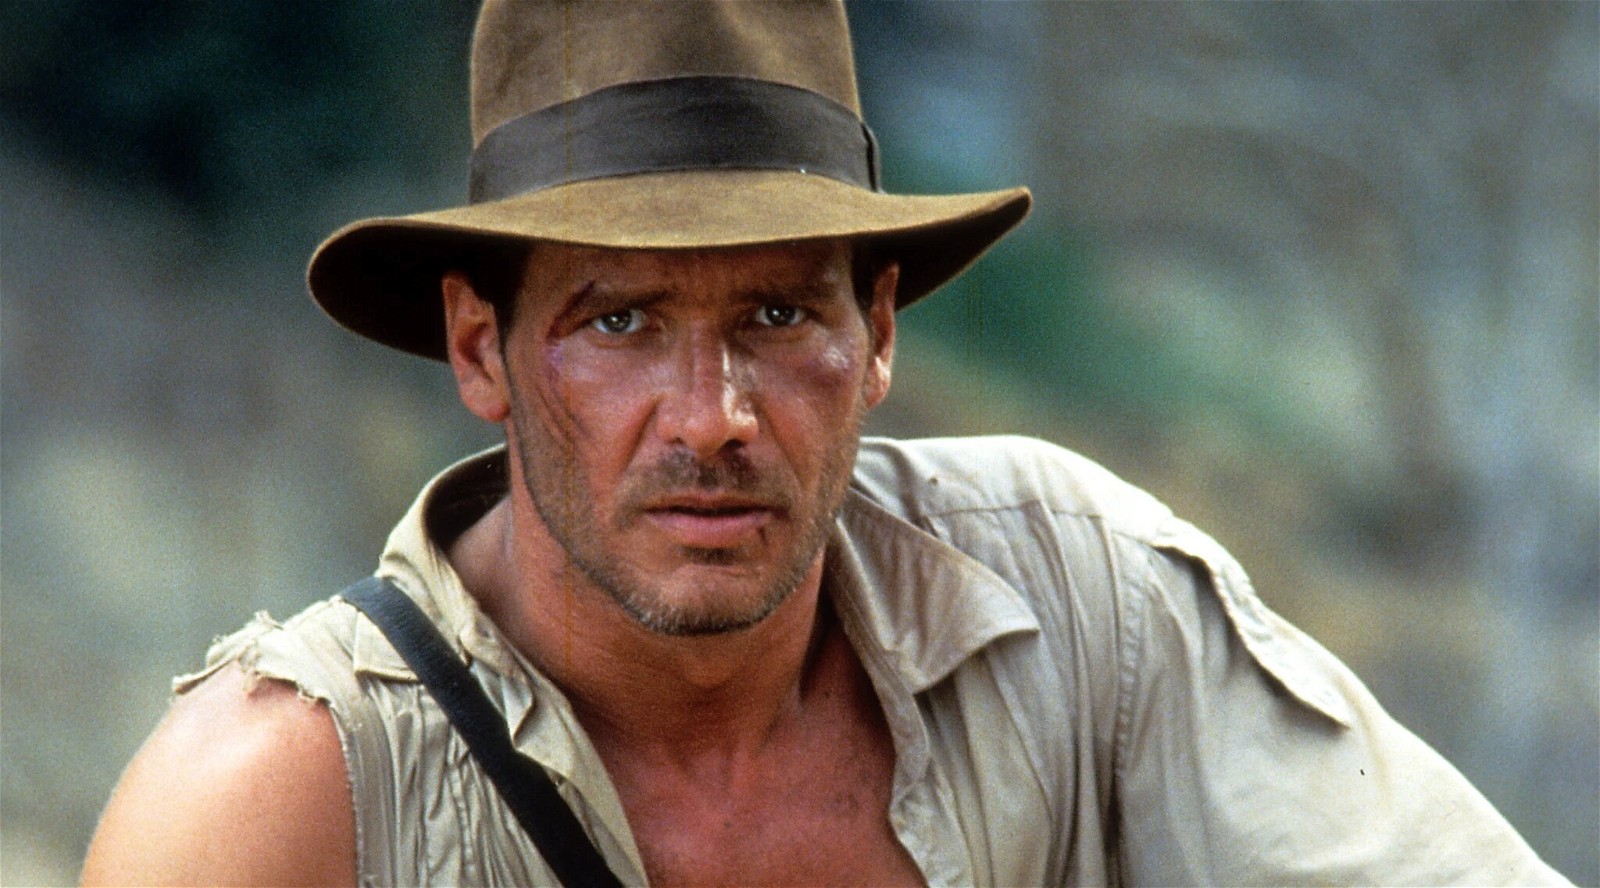 Harrison Ford in & as Indiana Jones